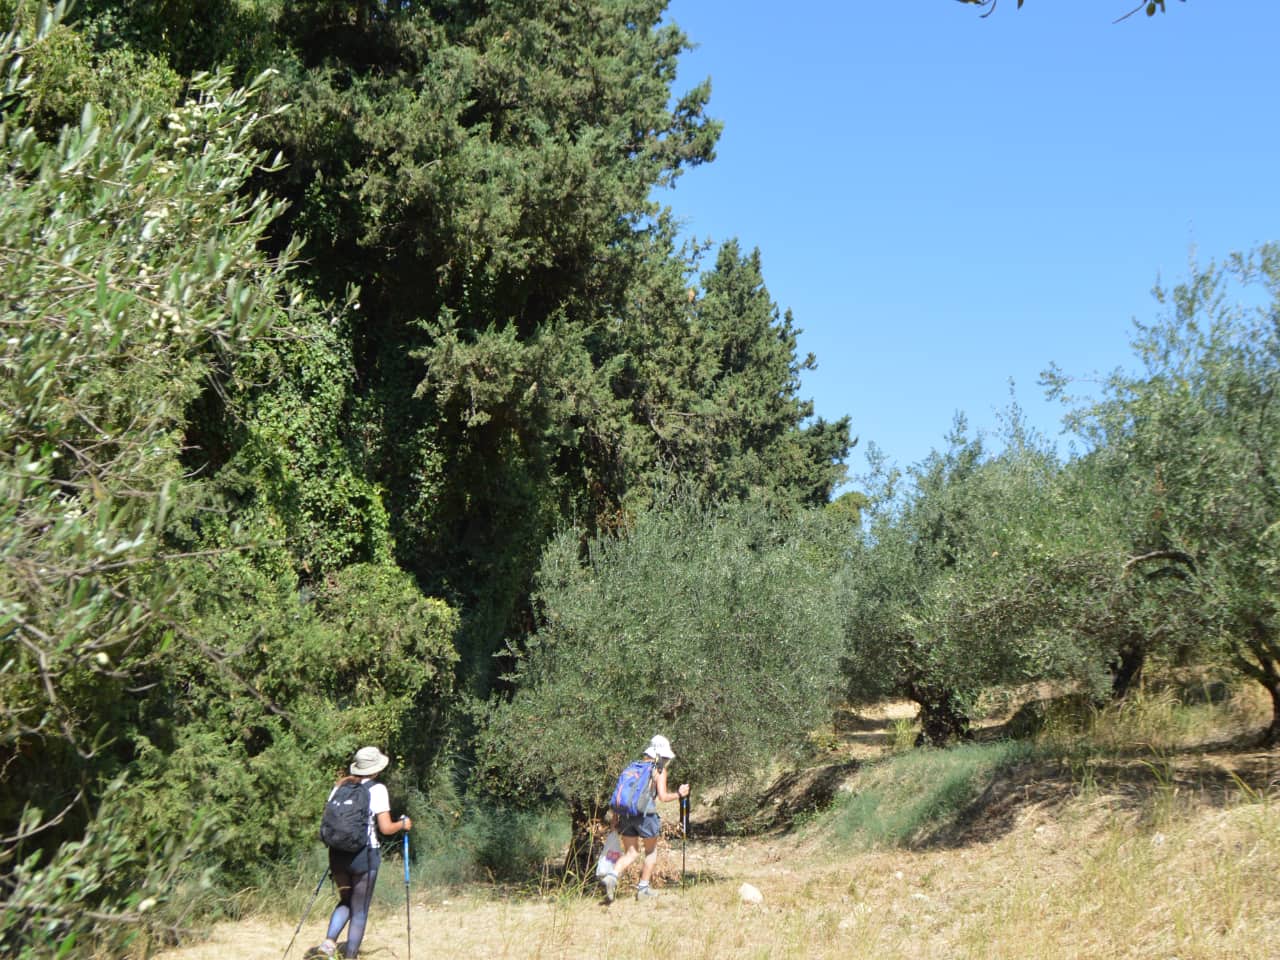 Hiking Tour In Picturesque Villages of Apokoronas, maheri village hiking tour, paidochori village hiking tour, neo chorio village hiking tour, apokoron villages best hiking tour, activities chania crete